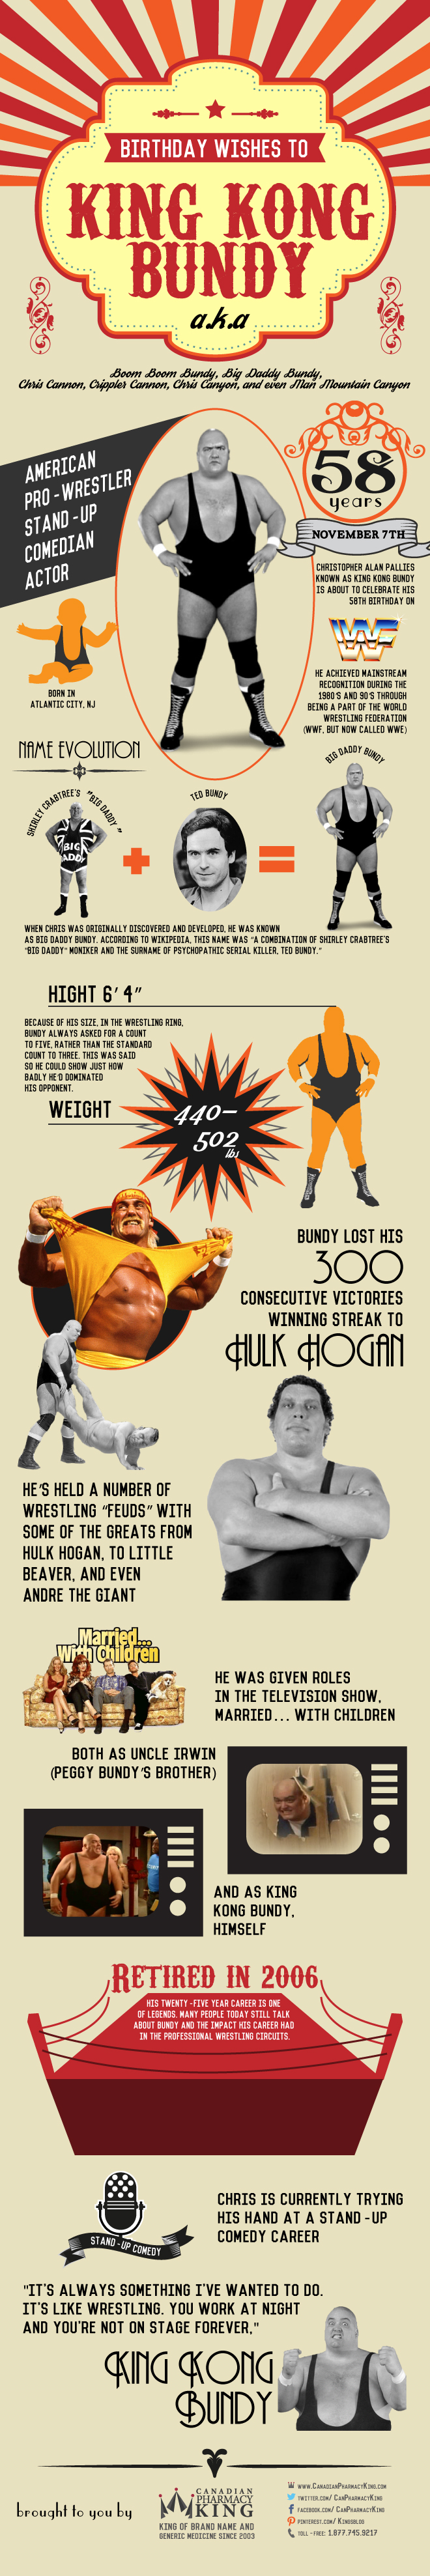 Birthday Wishes to King Kong Bundy Infographic